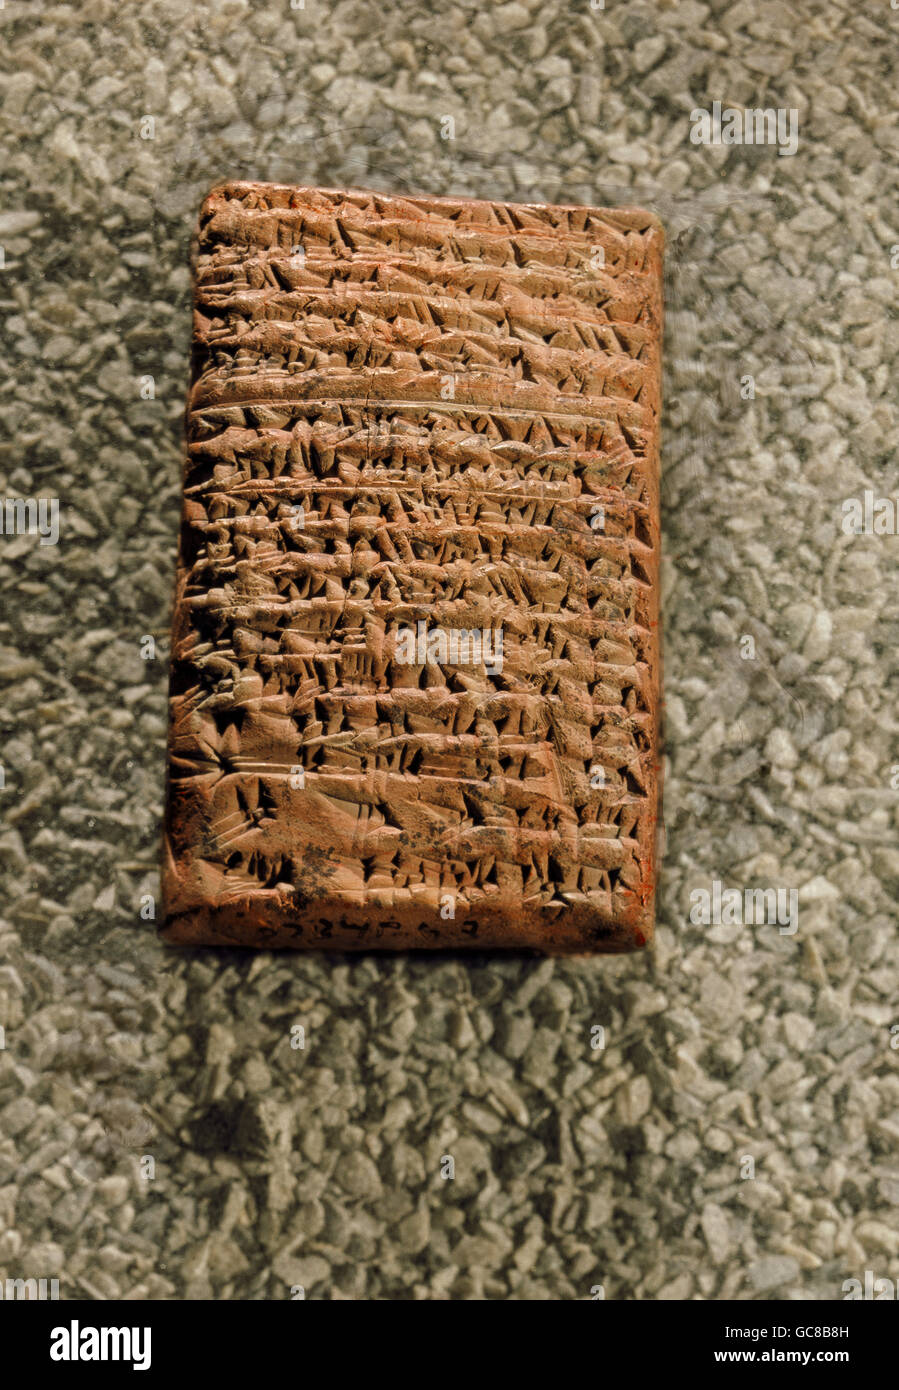 writing, scripture, cuneiform writing, Neo-Assyrian, sales contract for a femal slave, clay tablet, Nimrud, post 648 BC, Iraqi National Museum, Bagdad, ancient world, antiquity, Mesopotamia, Assyria, Neo - Assyrian, document, trade, slavery, historic, historical, ancient world, Additional-Rights-Clearences-Not Available Stock Photo